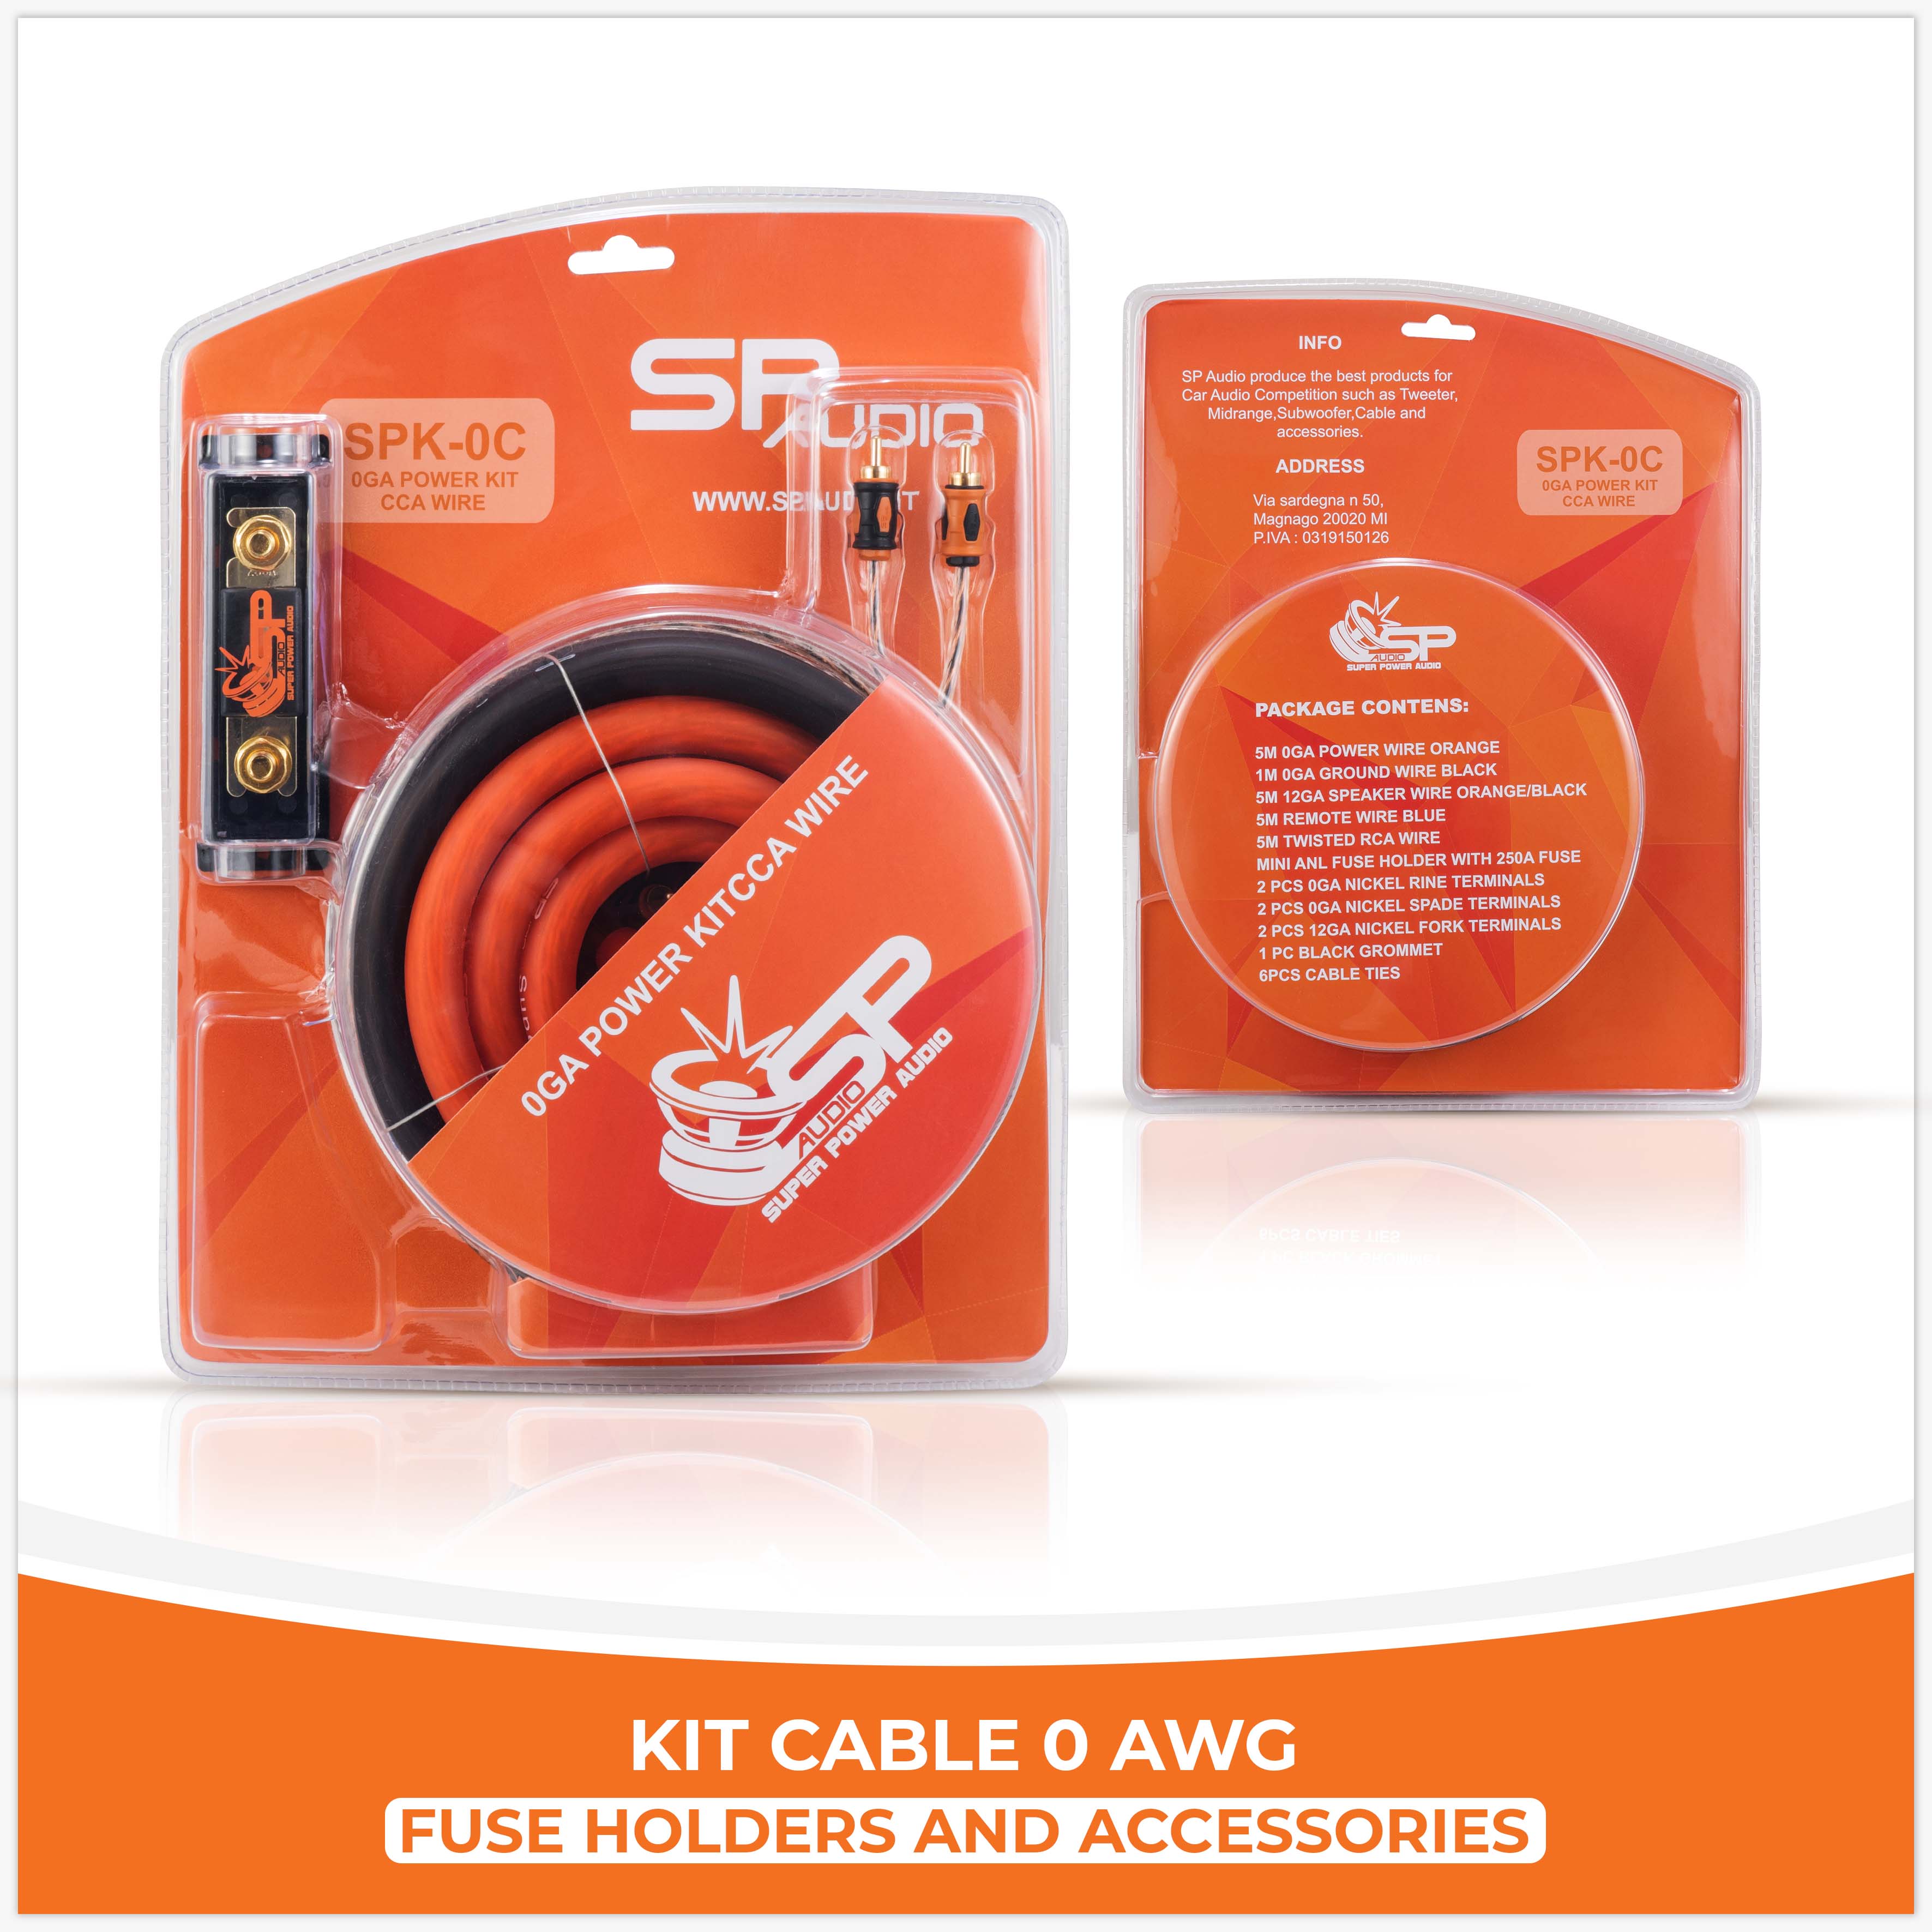 Cable del kit 0 AWG – spaudio